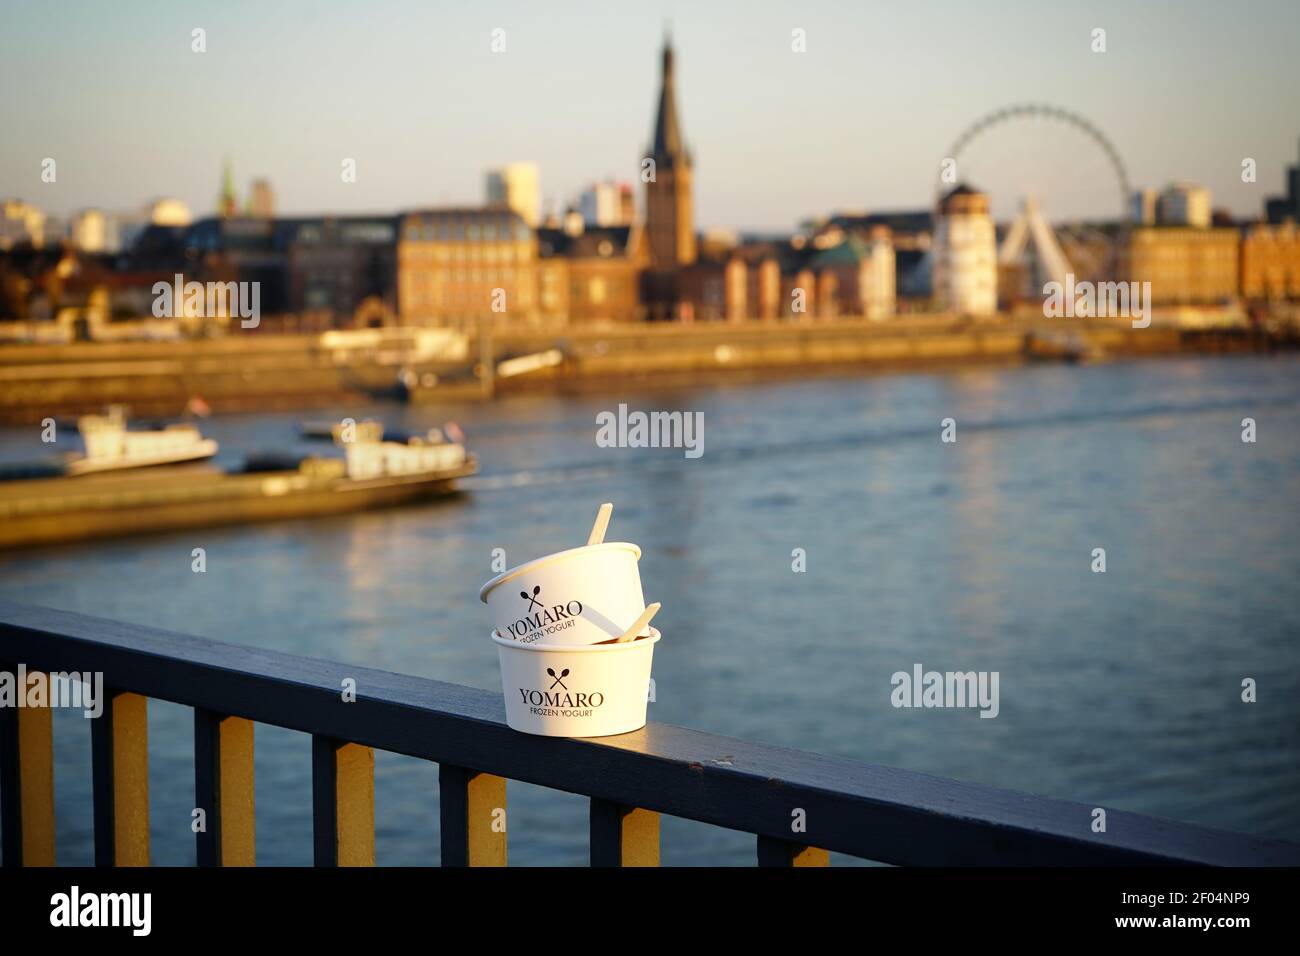 'Yomaro' frozen yogurt paper cups on the railing of Oberkasseler bridge at Rhine river. View of Old Town in the blurred background. Vignette effect. Stock Photo